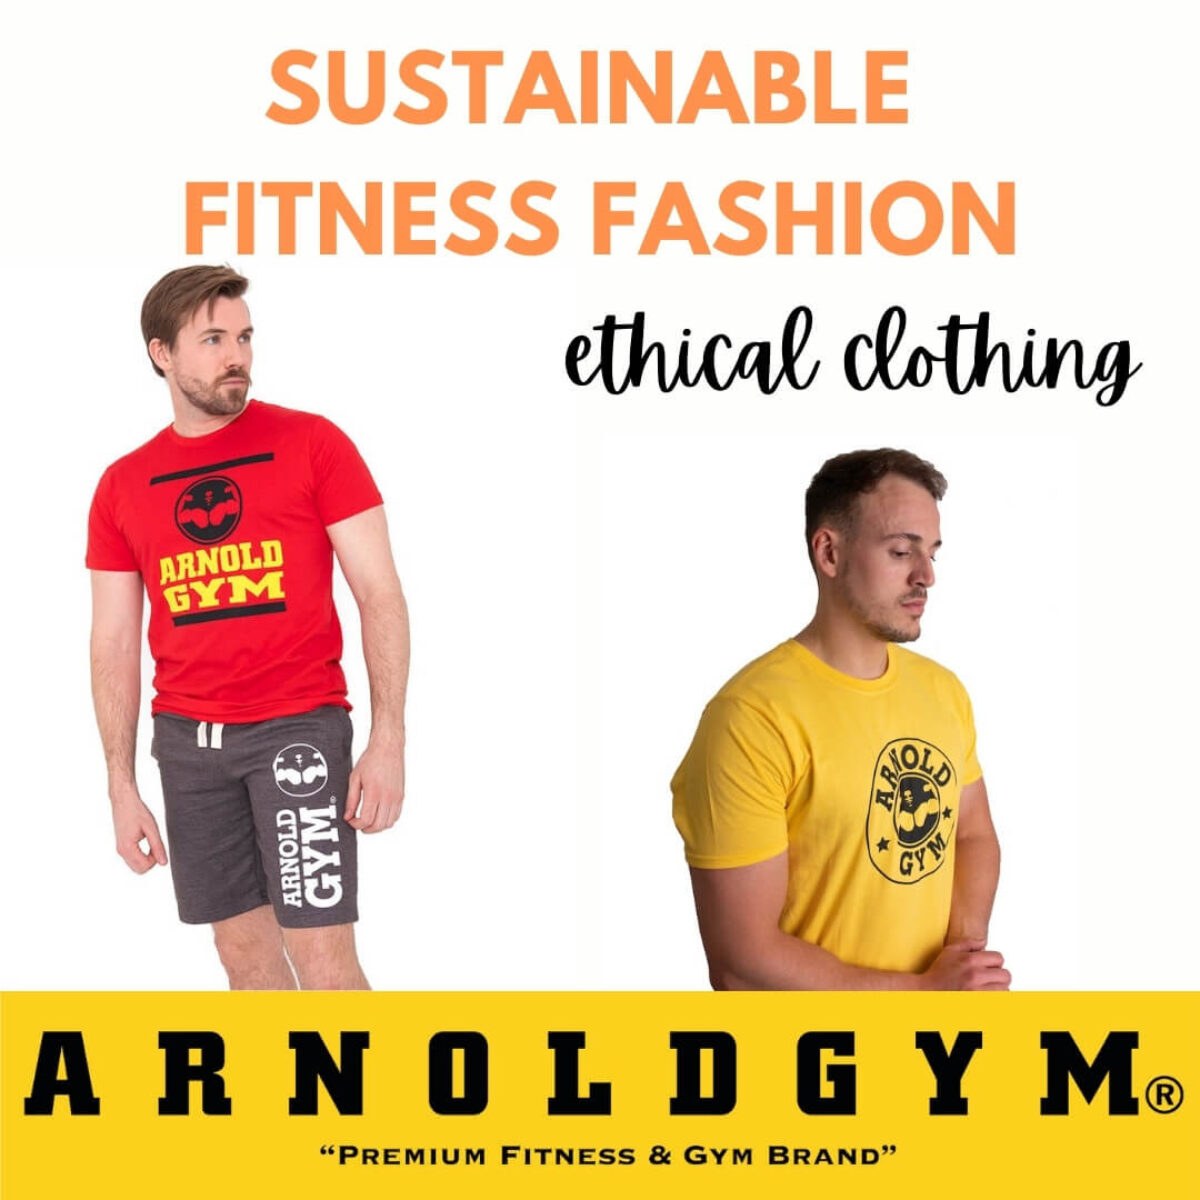 Sustainable Fashion - Ethical Clothing Brands - Arnold Gym Gear